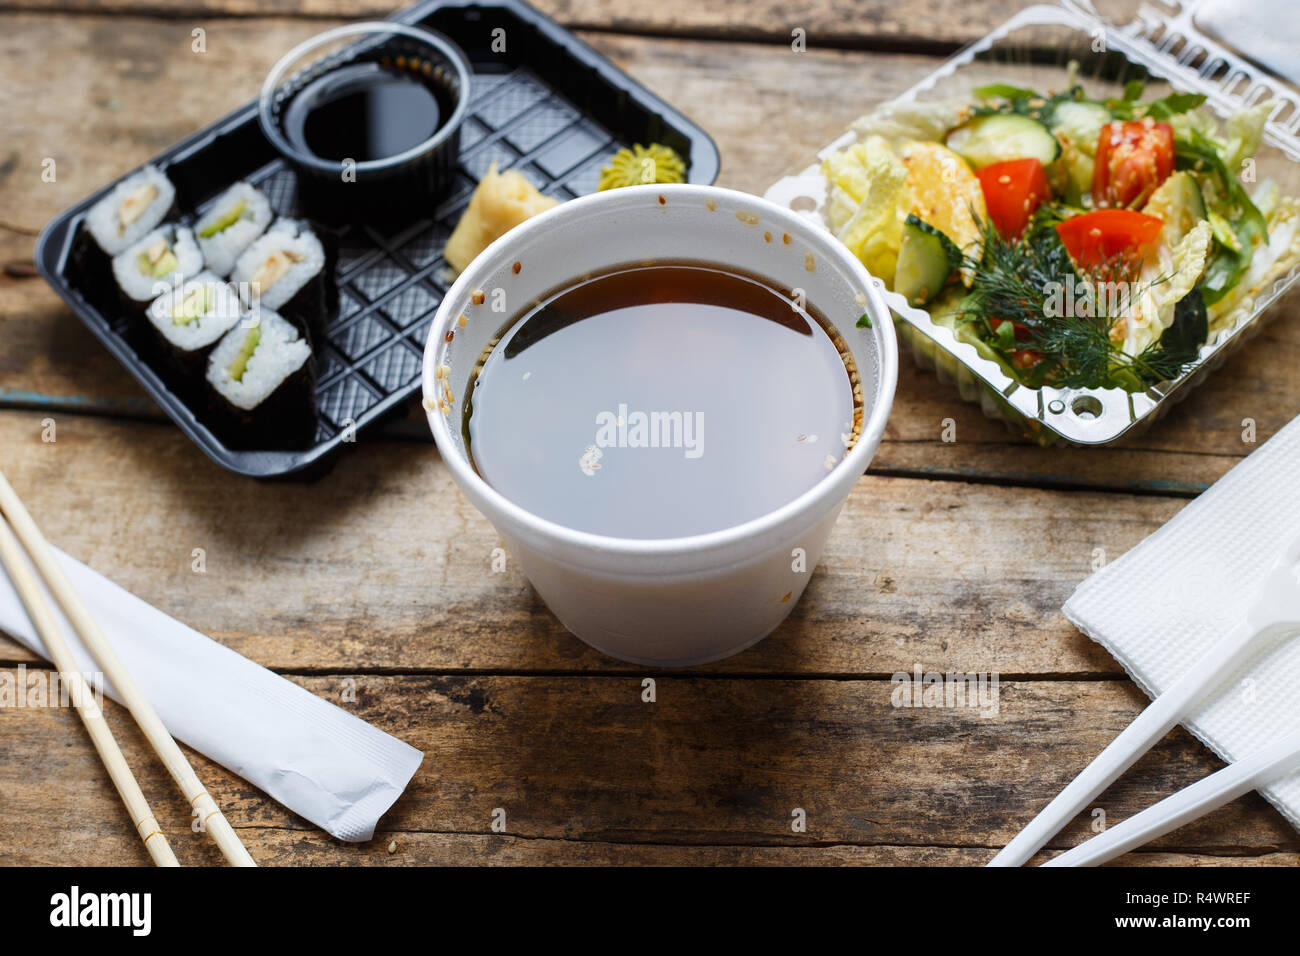 Food delivery concept background. Asian business lunch on grunge wooden table Stock Photo